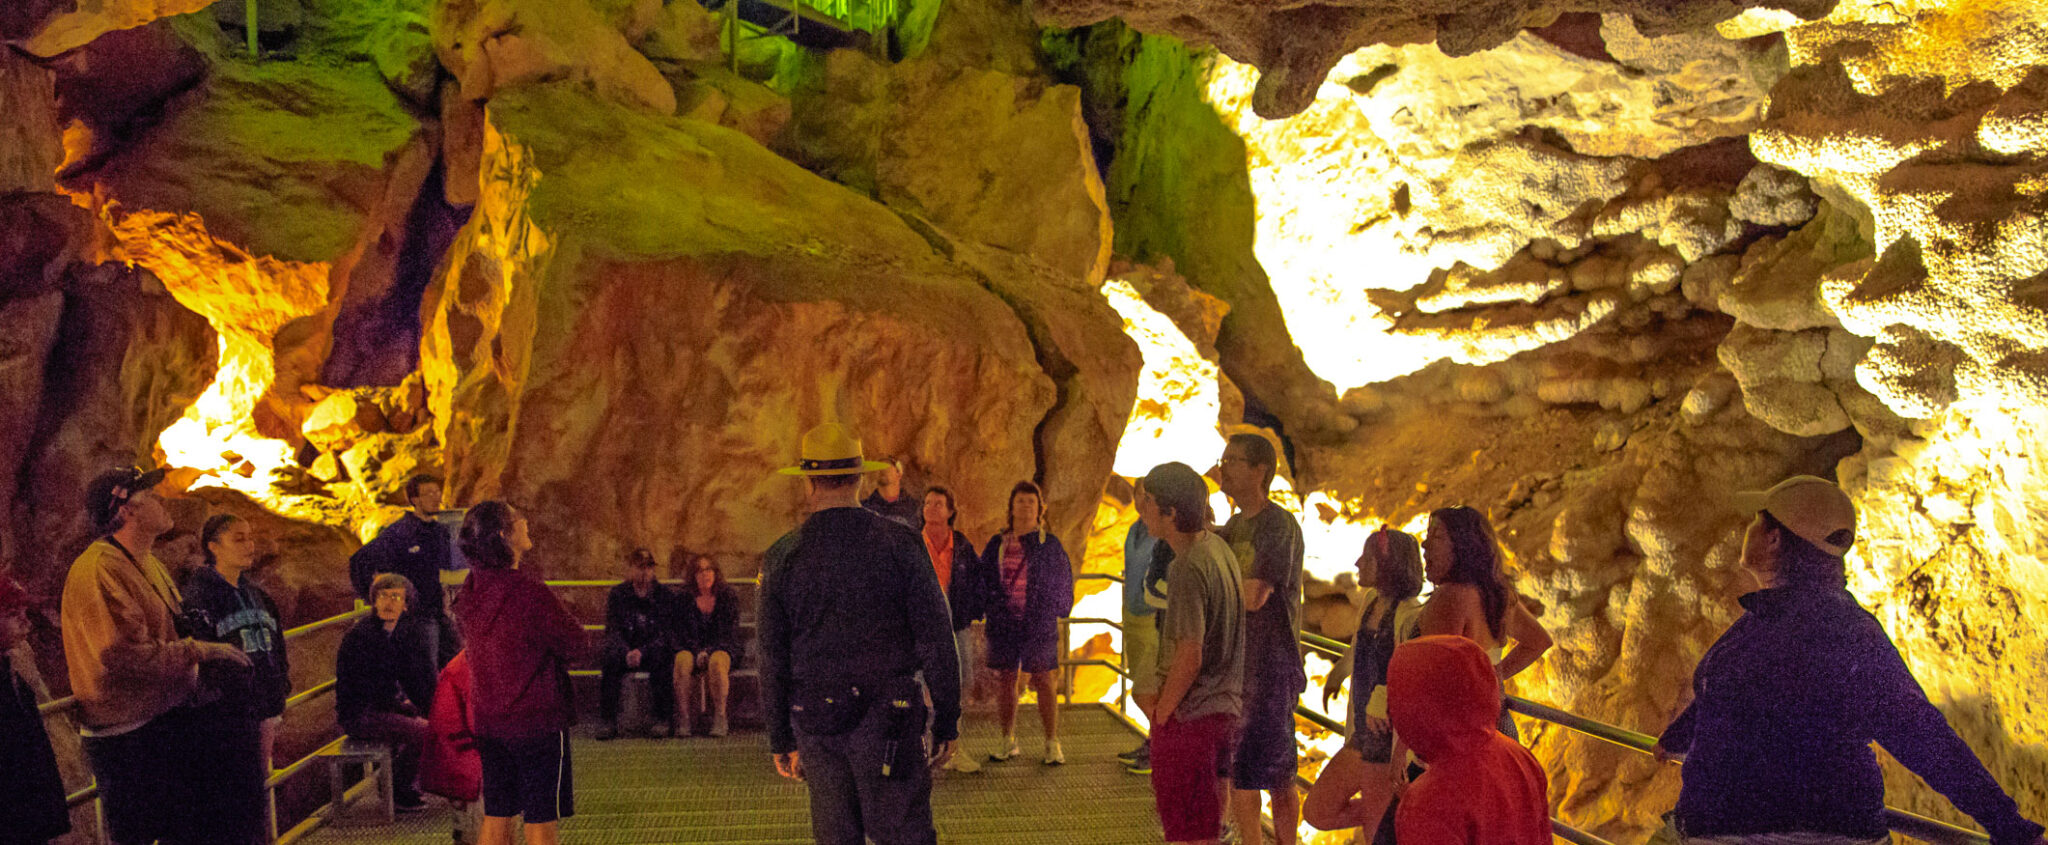 Jr. Ranger Day at Jewel Cave National Monument